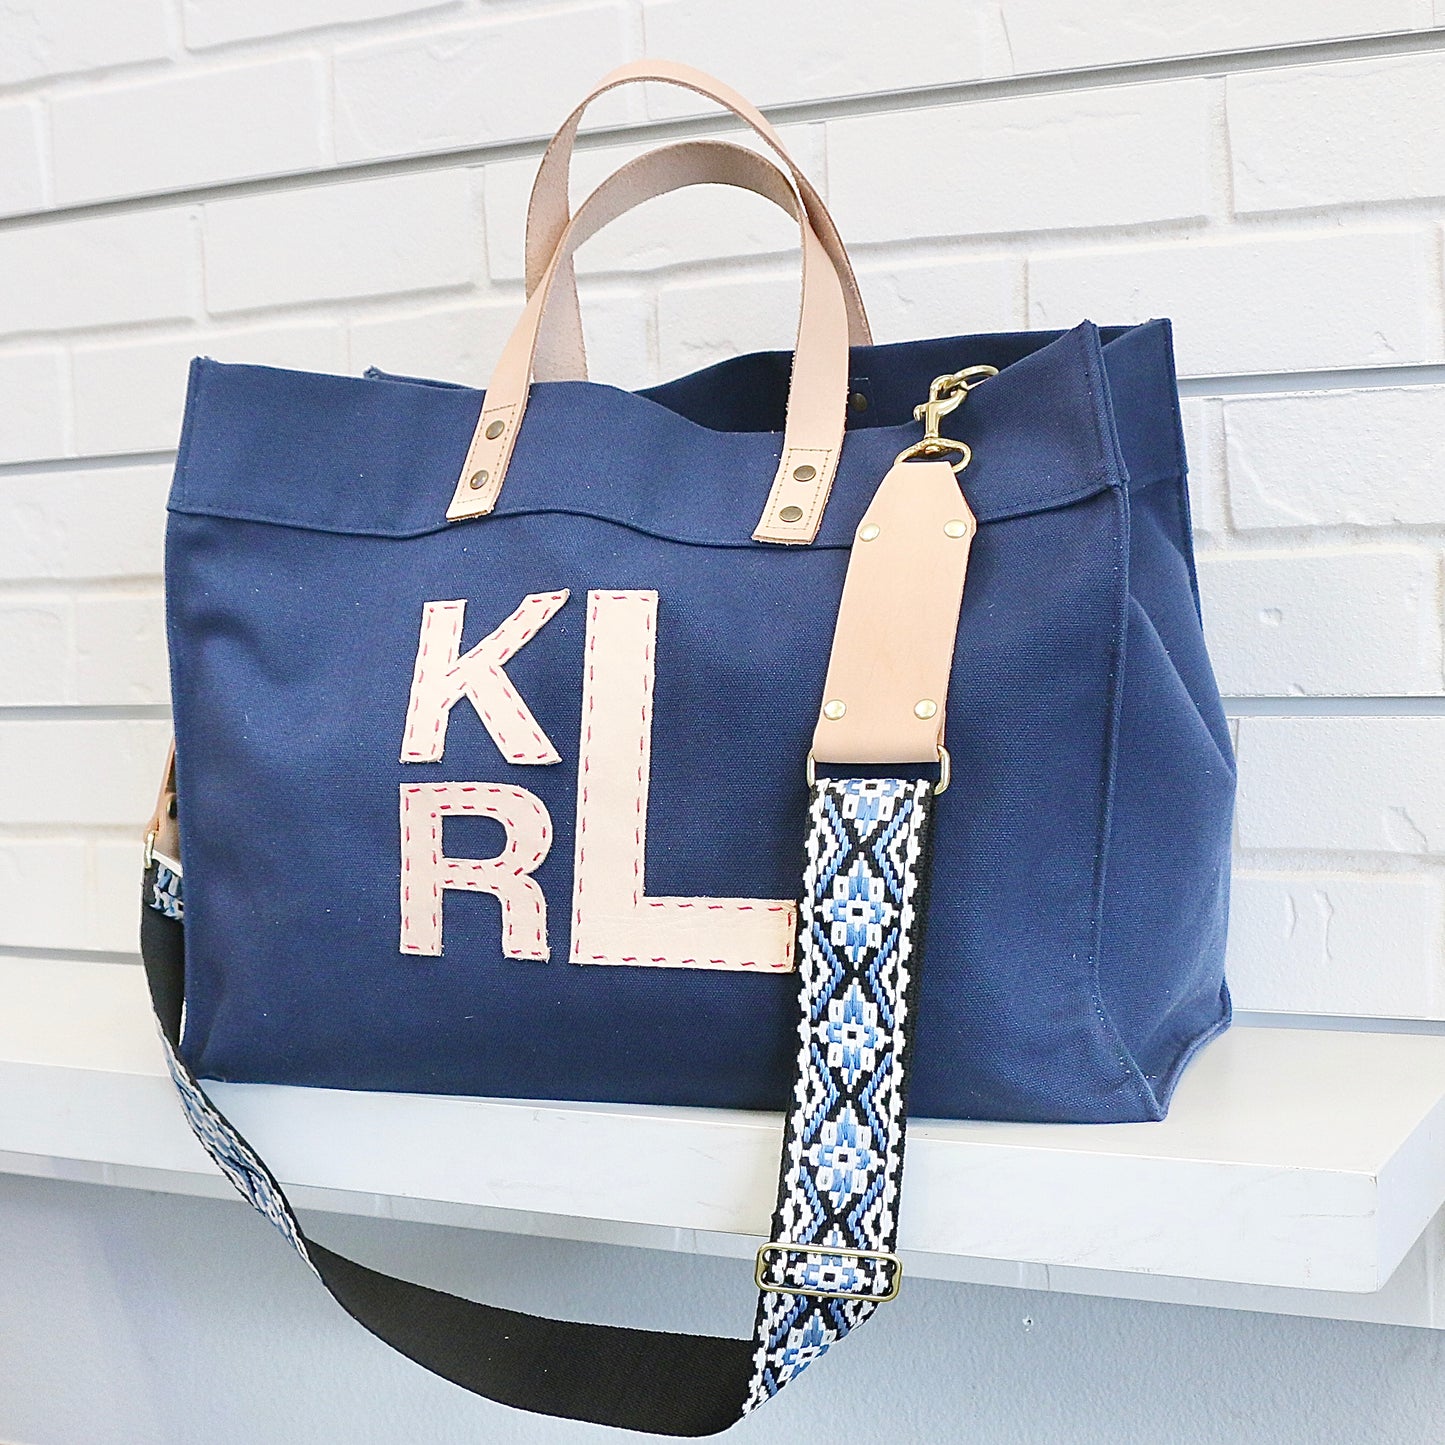 Large Navy Tote with 3 Initial Monogram Totes Helene Thomas   